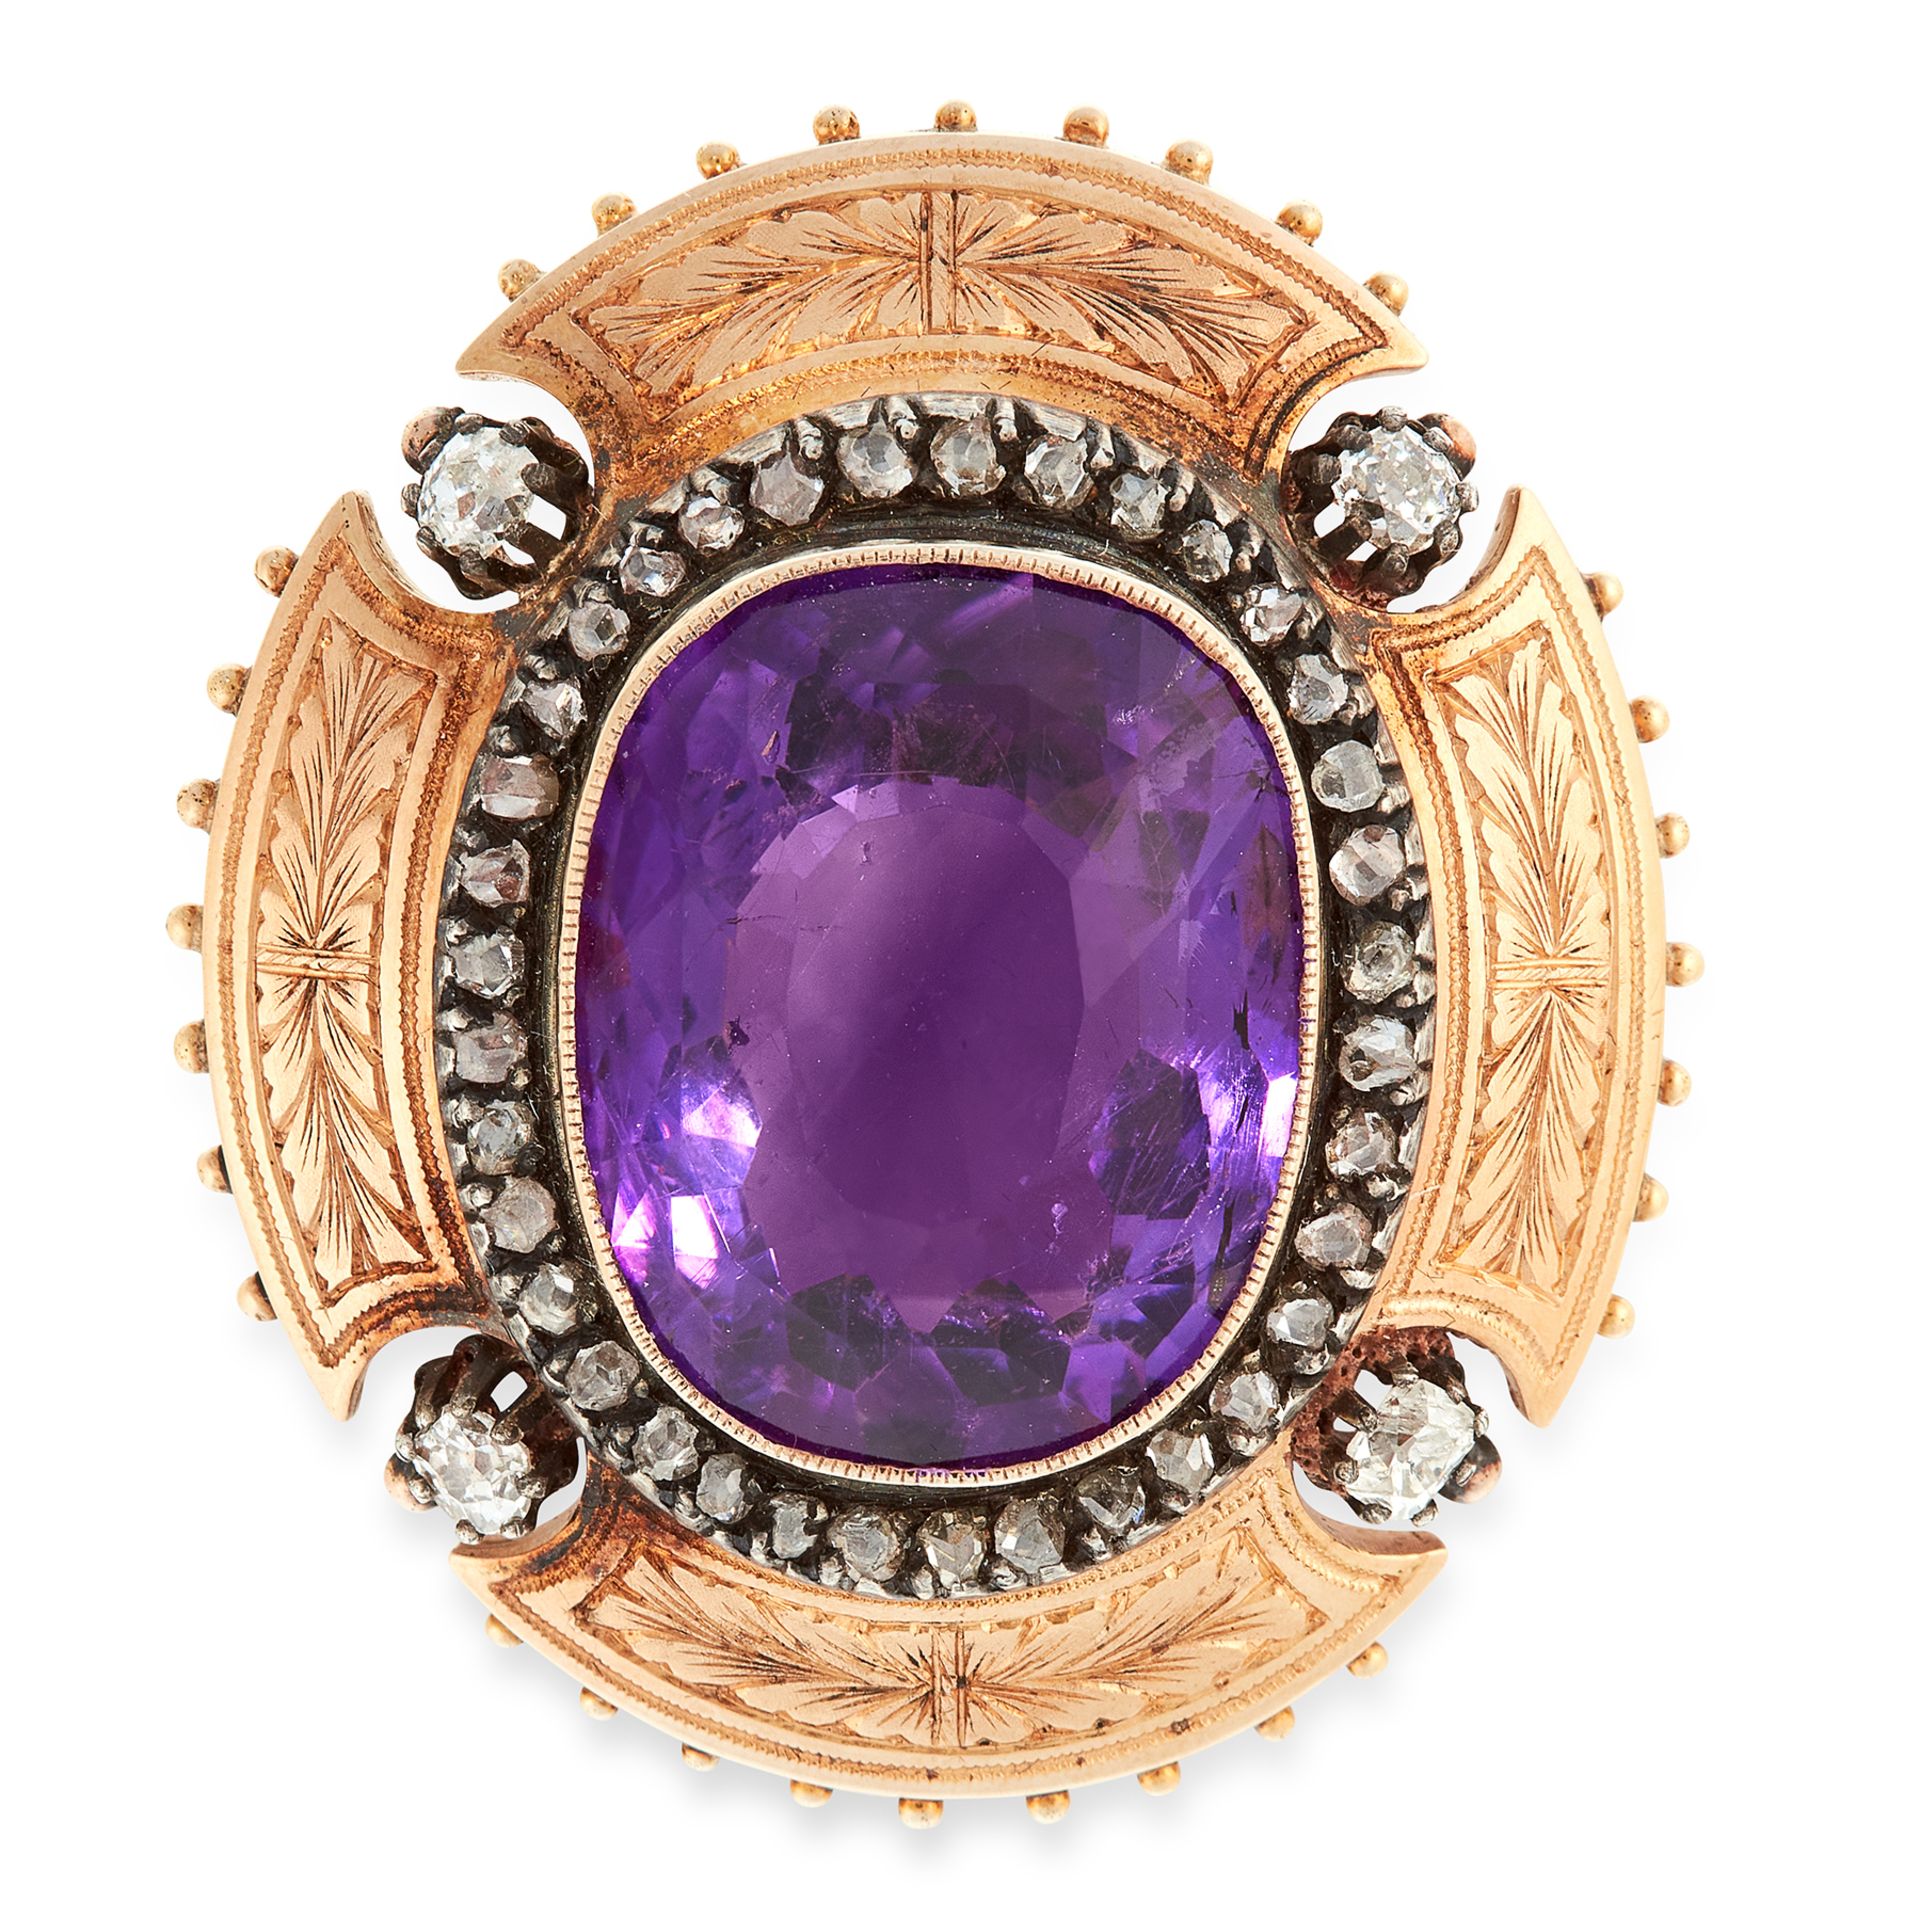 AN ANTIQUE AMETHYST AND DIAMOND BROOCH / PENDANT in 18ct yellow gold and silver, set with a